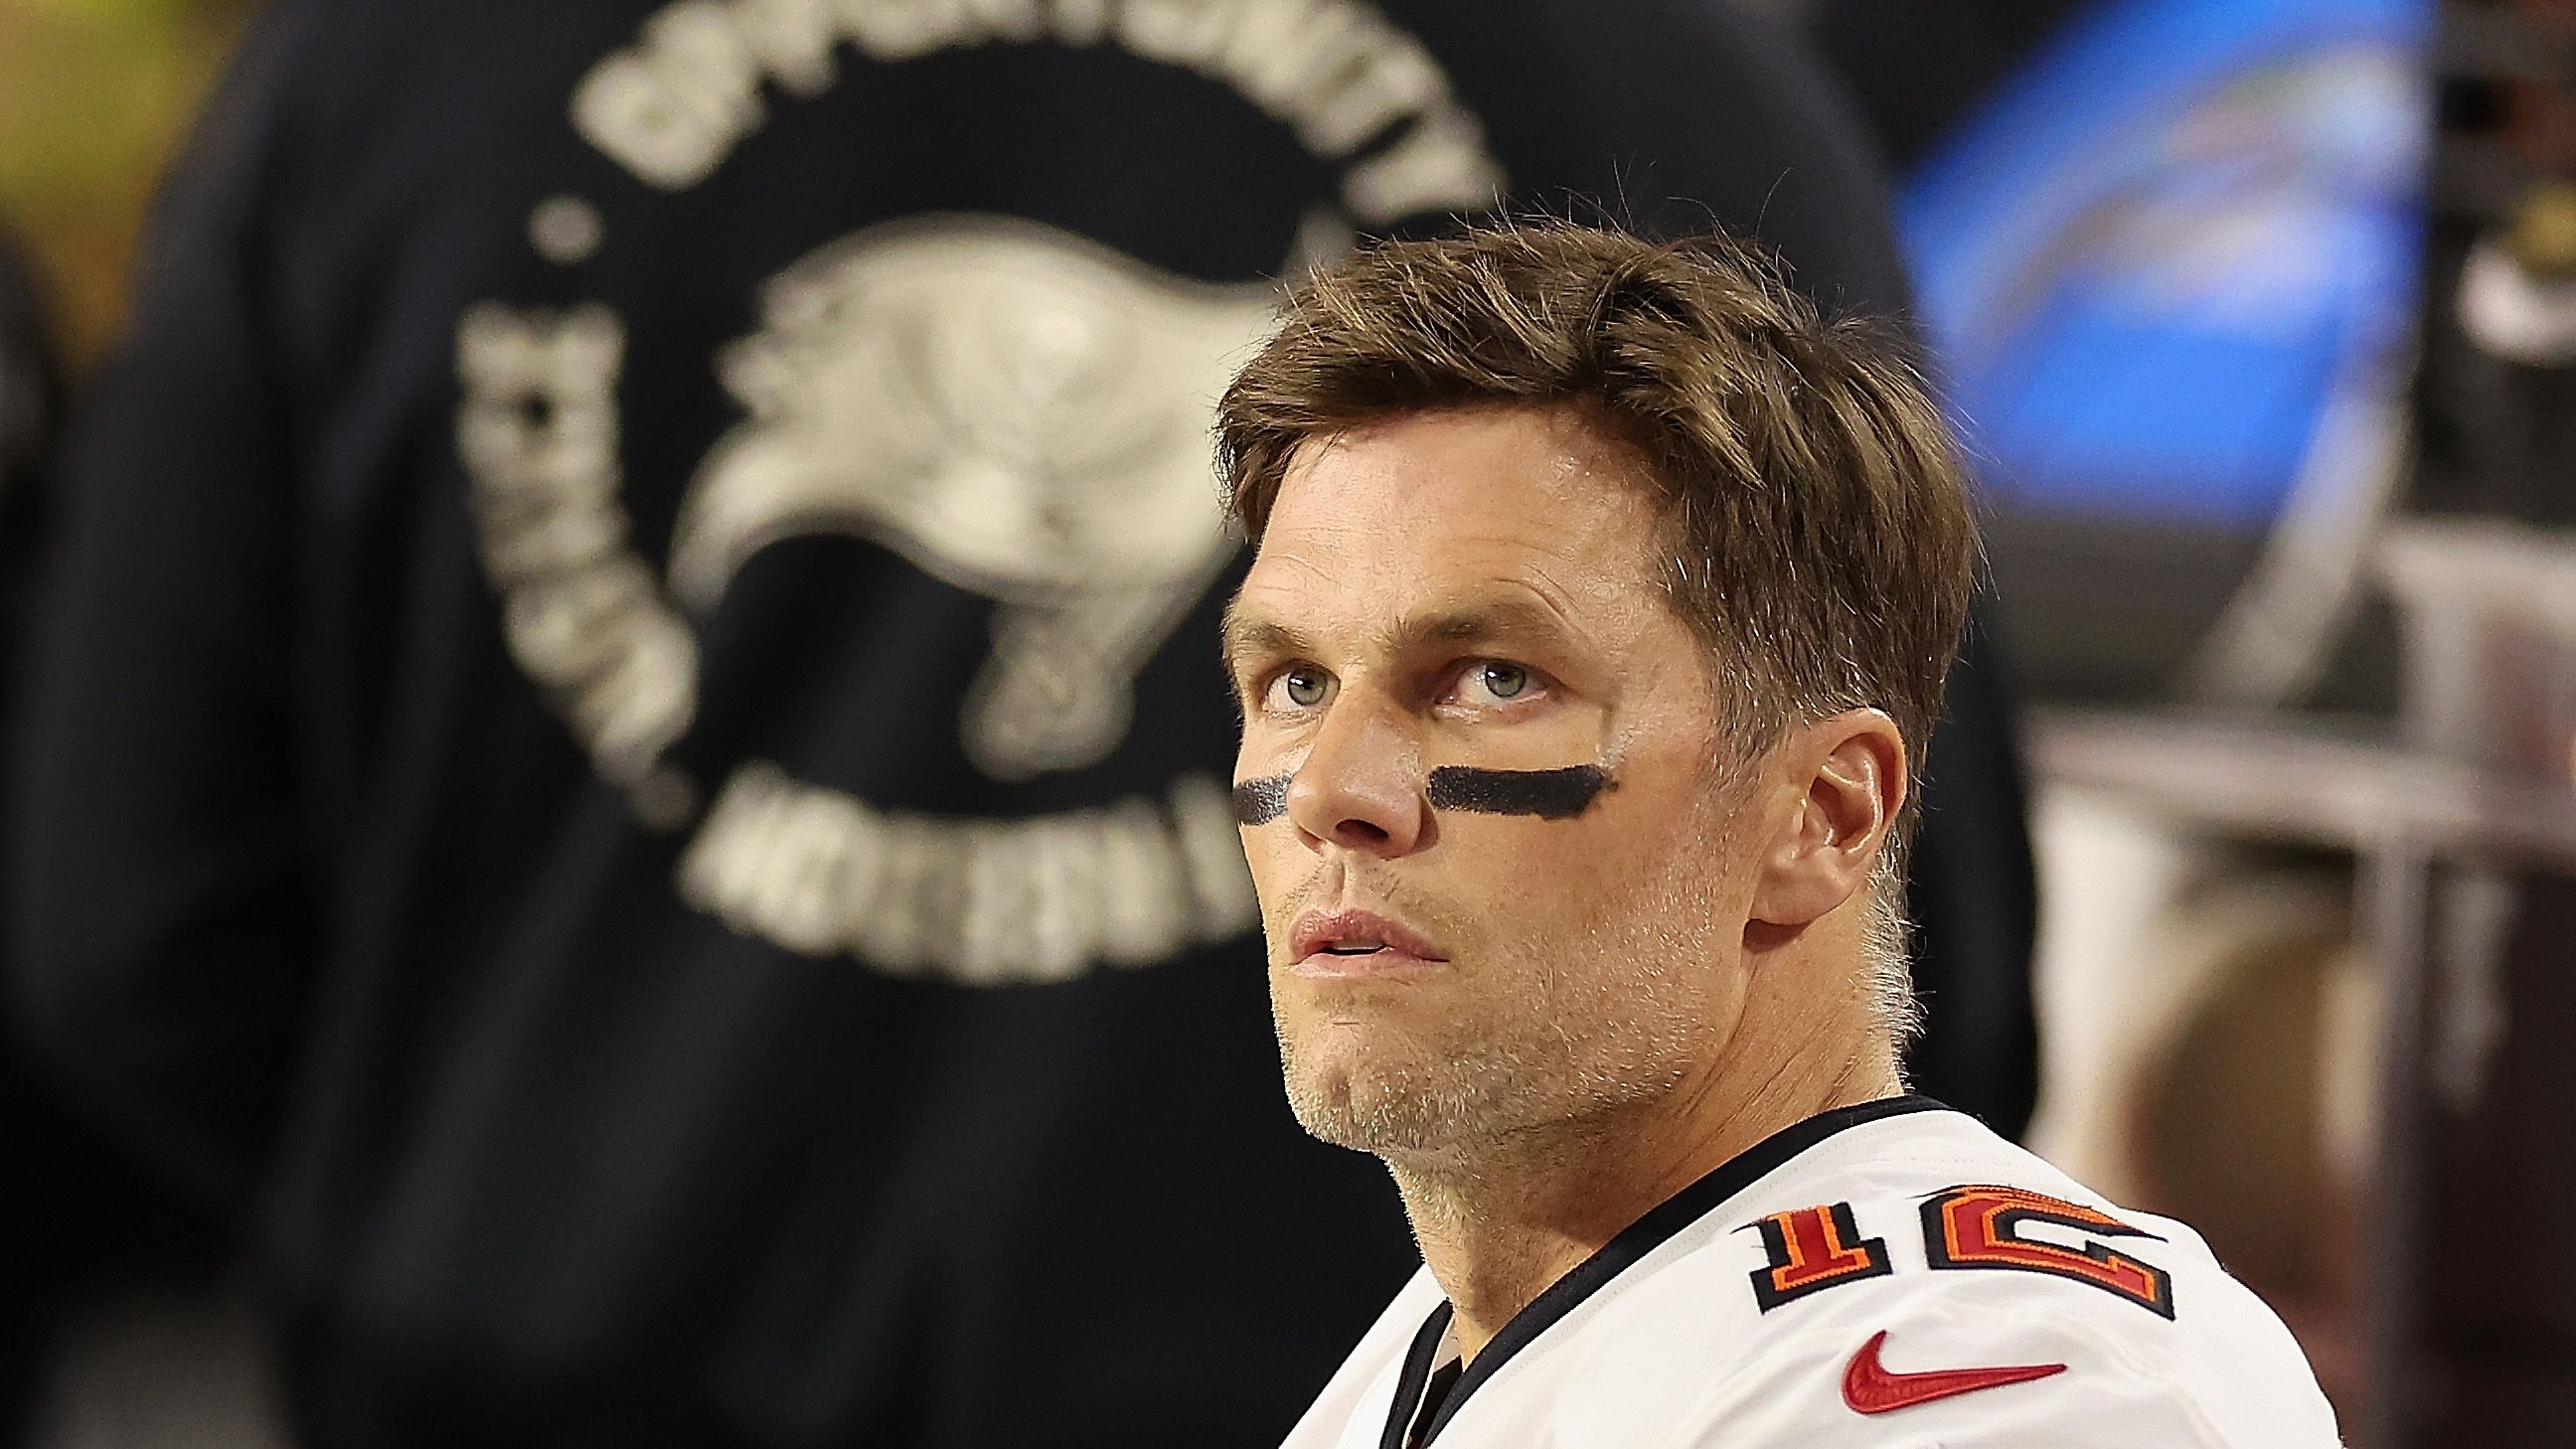 Tom Brady: 'I'm going to take my time' before deciding on